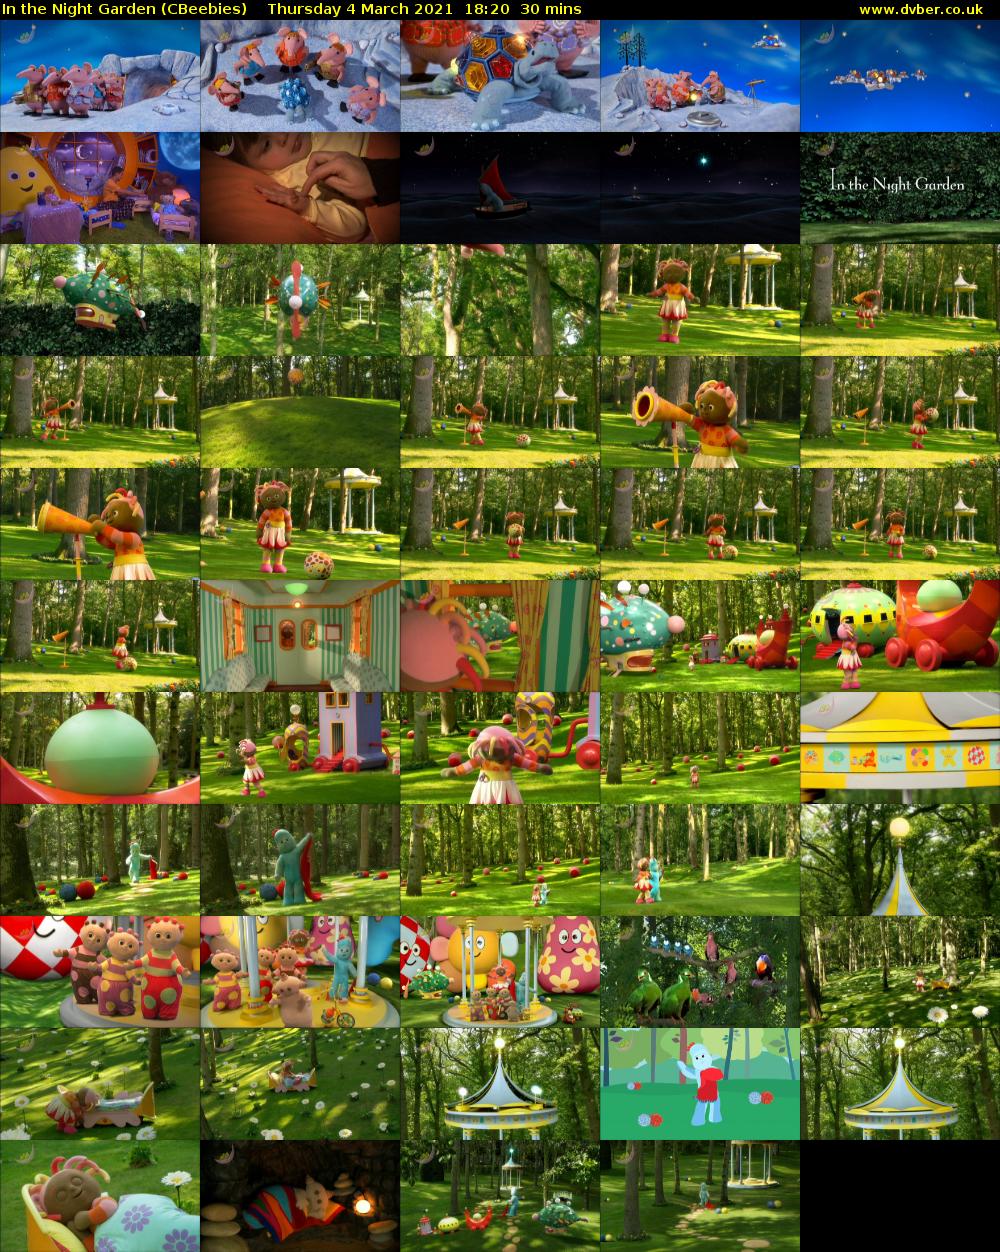 In the Night Garden (CBeebies) Thursday 4 March 2021 18:20 - 18:50